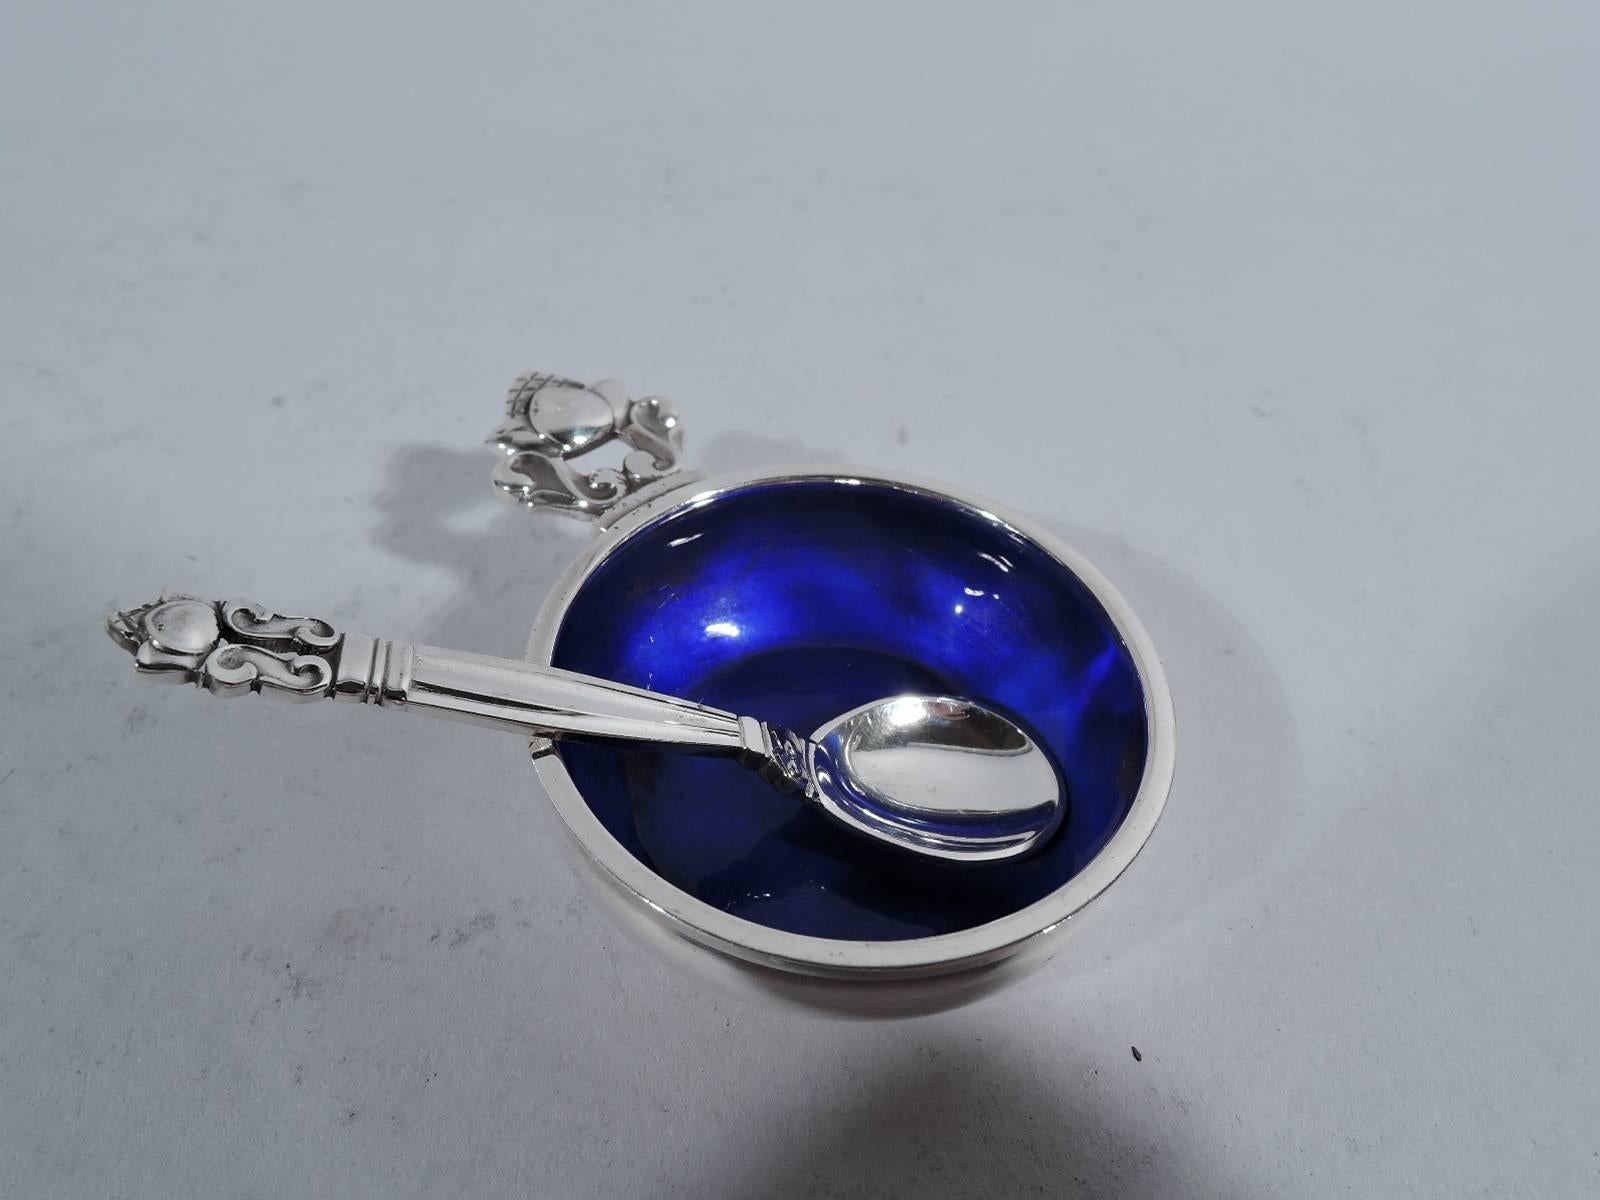 Set of four sterling silver and enamel open salts and spoons in Acorn pattern. Made by Georg Jensen in Copenhagen. Each salt: Bowl with curved sides, cobalt enameled interior, and stylized acorn handle. Each spoon: Fluted stem, oval bowl, and